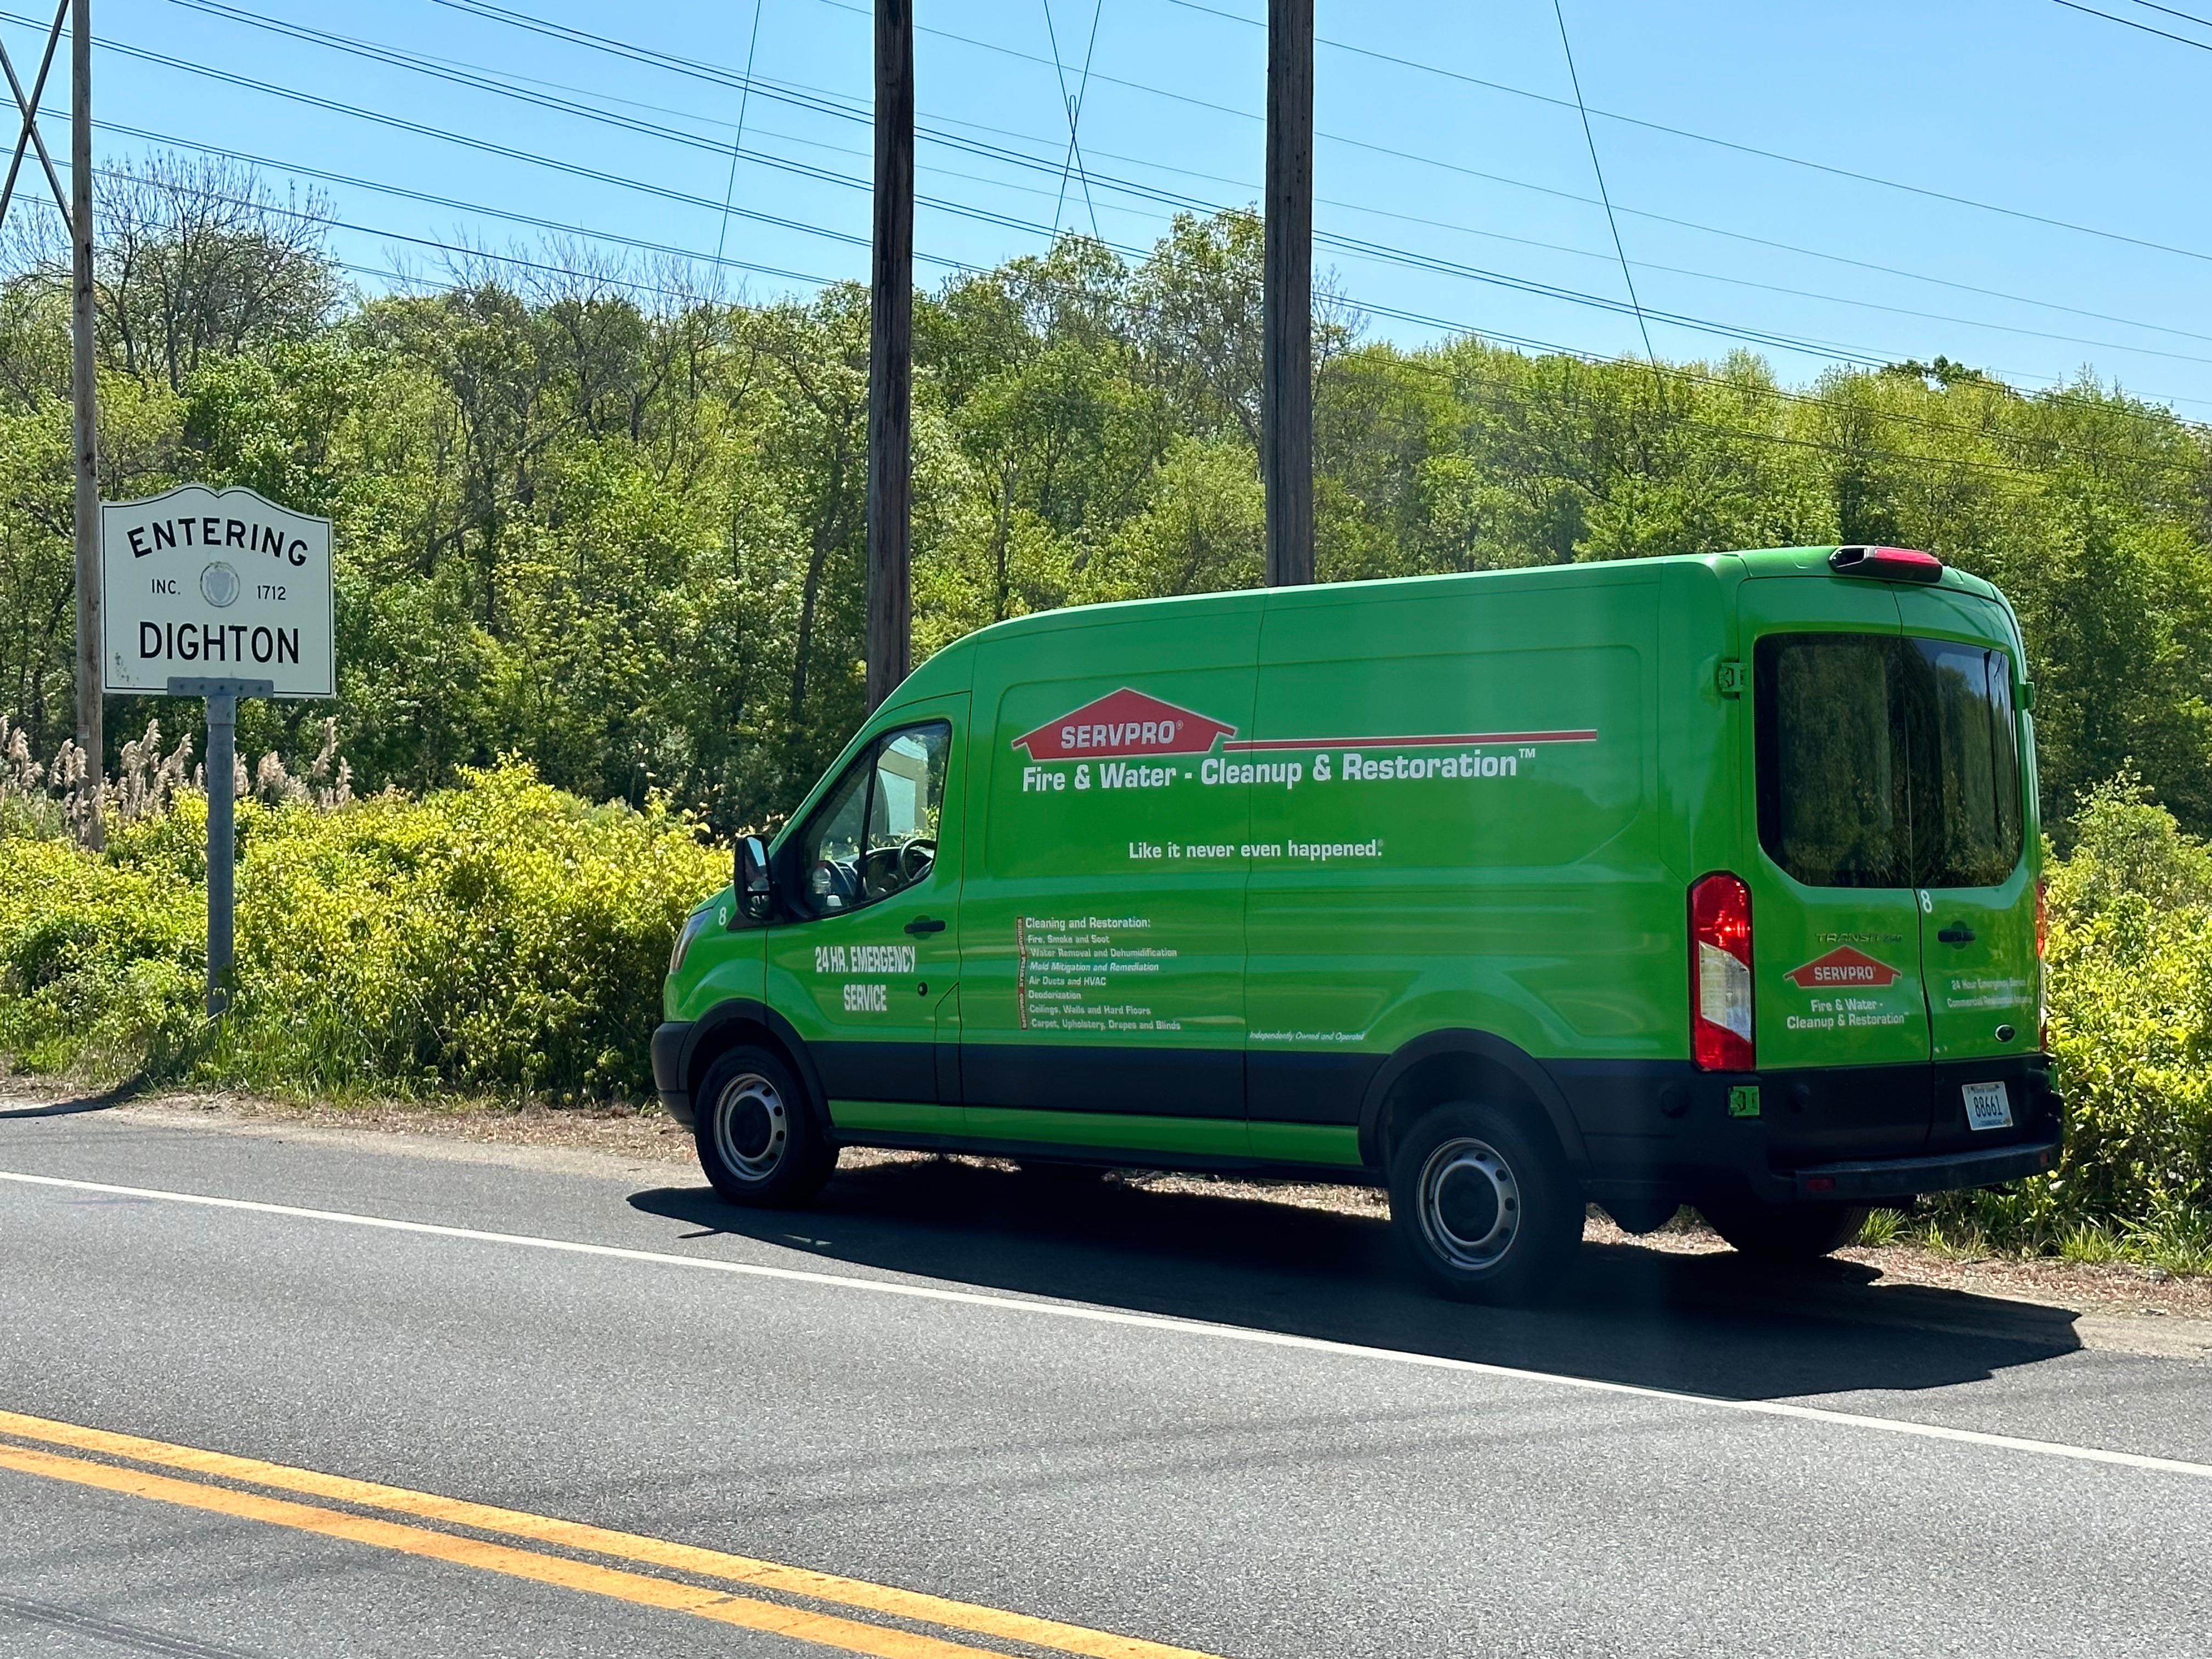 When disaster strikes, SERVPRO of  Taunton/Mansfield is here to help. Our full-service emergency response team is equipped to handle water, fire, and mold emergencies in Chartley, MA with speed and efficiency. Give us a call to schedule services!